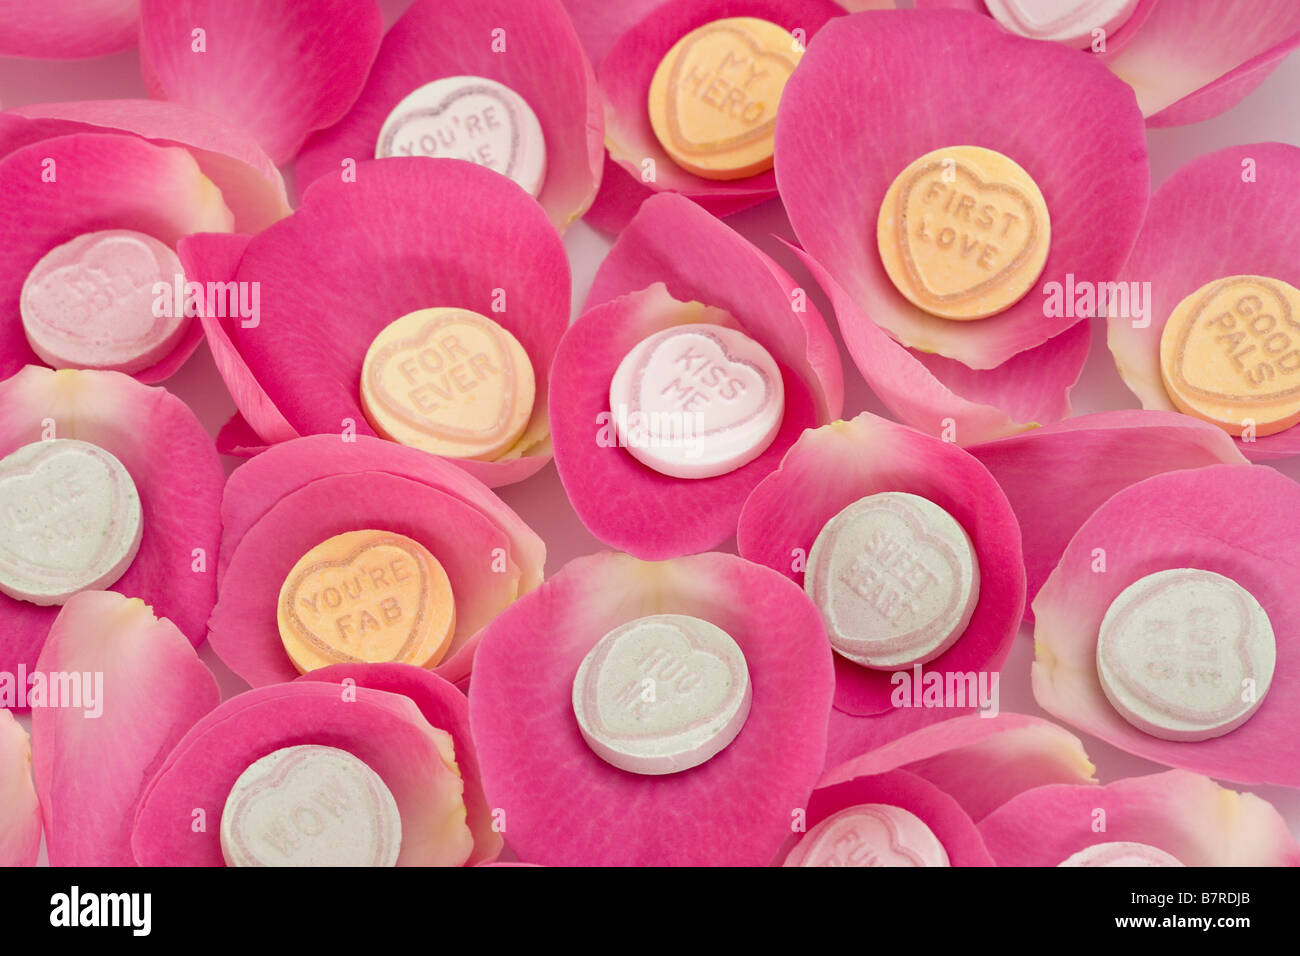 Love hearts sweets on pink petals Stock Photo